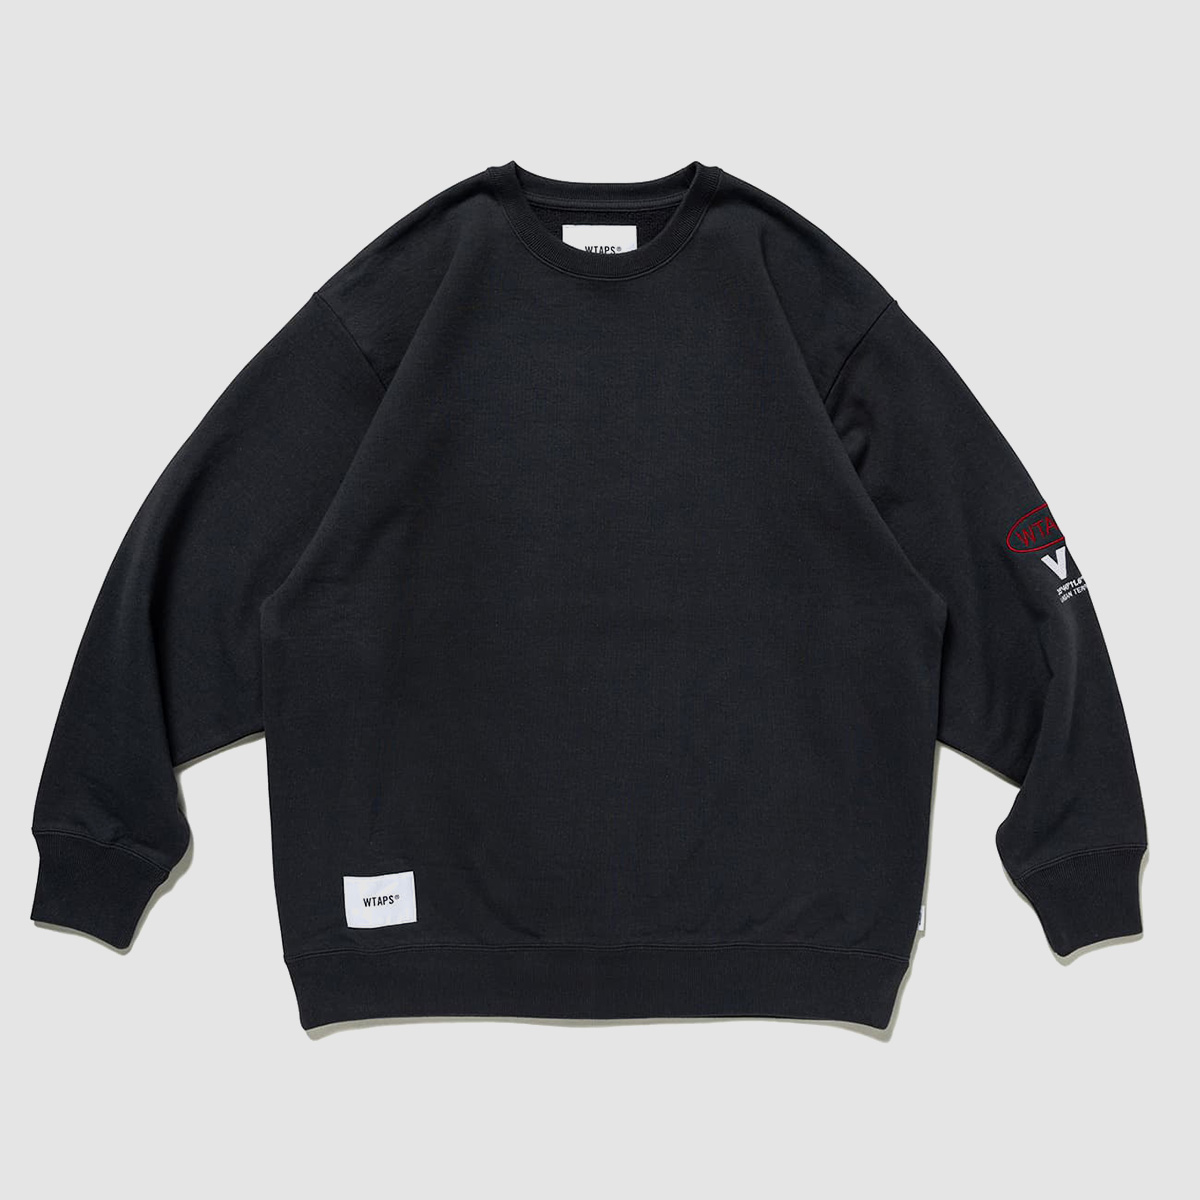 INVINCIBLE - AII 01 / SWEATER / COTTON. PROTECT